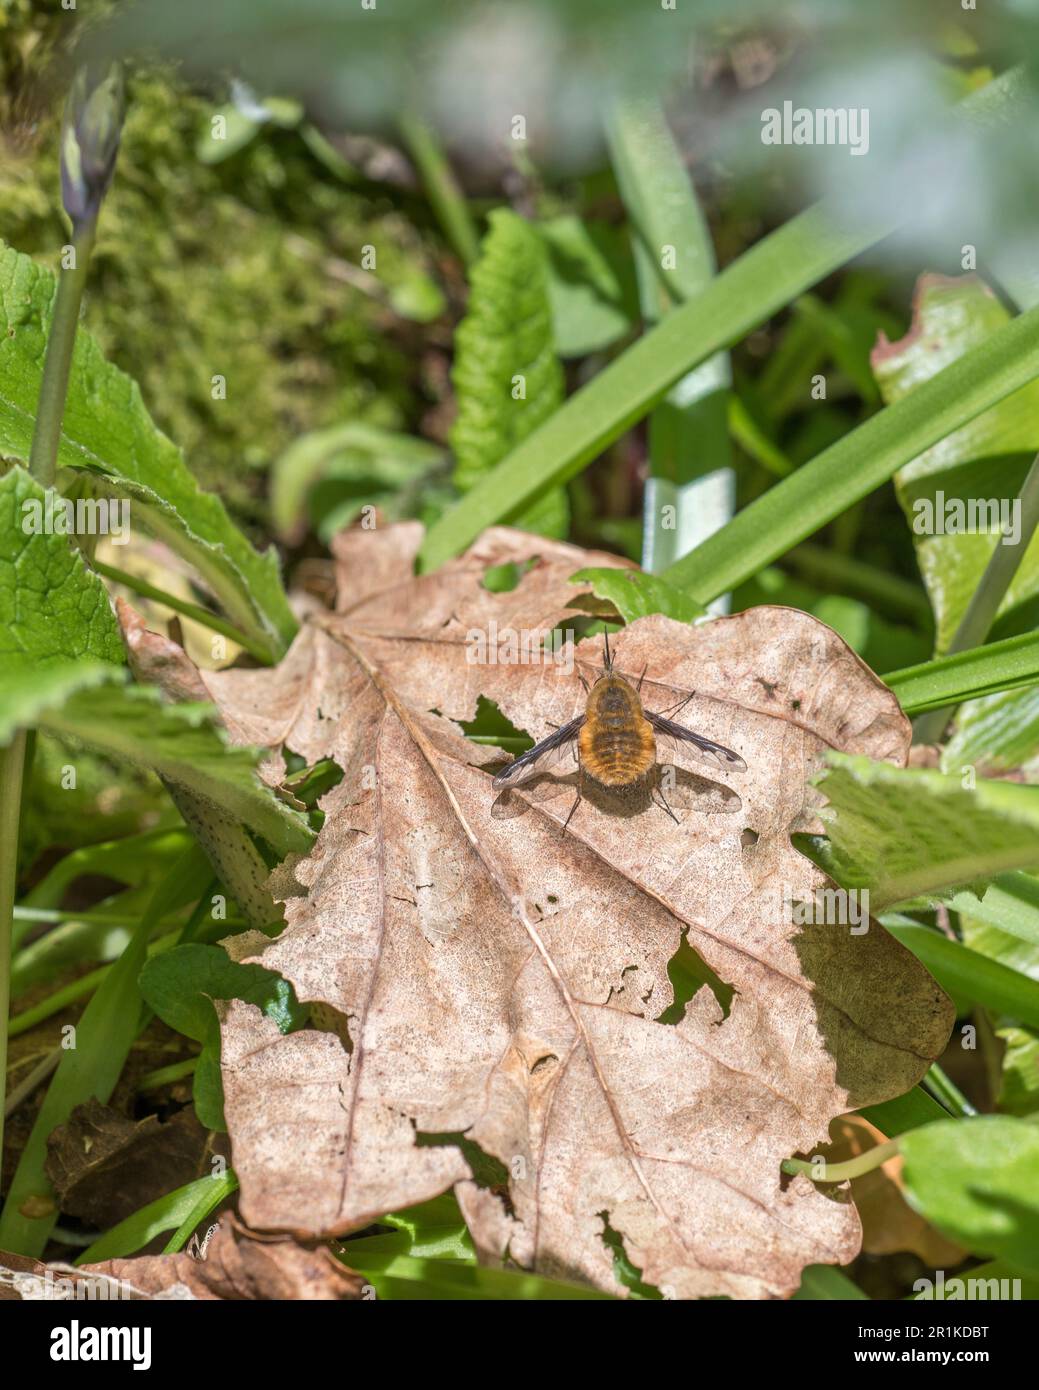 Fluffy orange Dark-Edged Bee-fly / Bombylius major resting on leaf in sunshine. Bee flies are a parasitic species, and do not sting like bees proper. Stock Photo